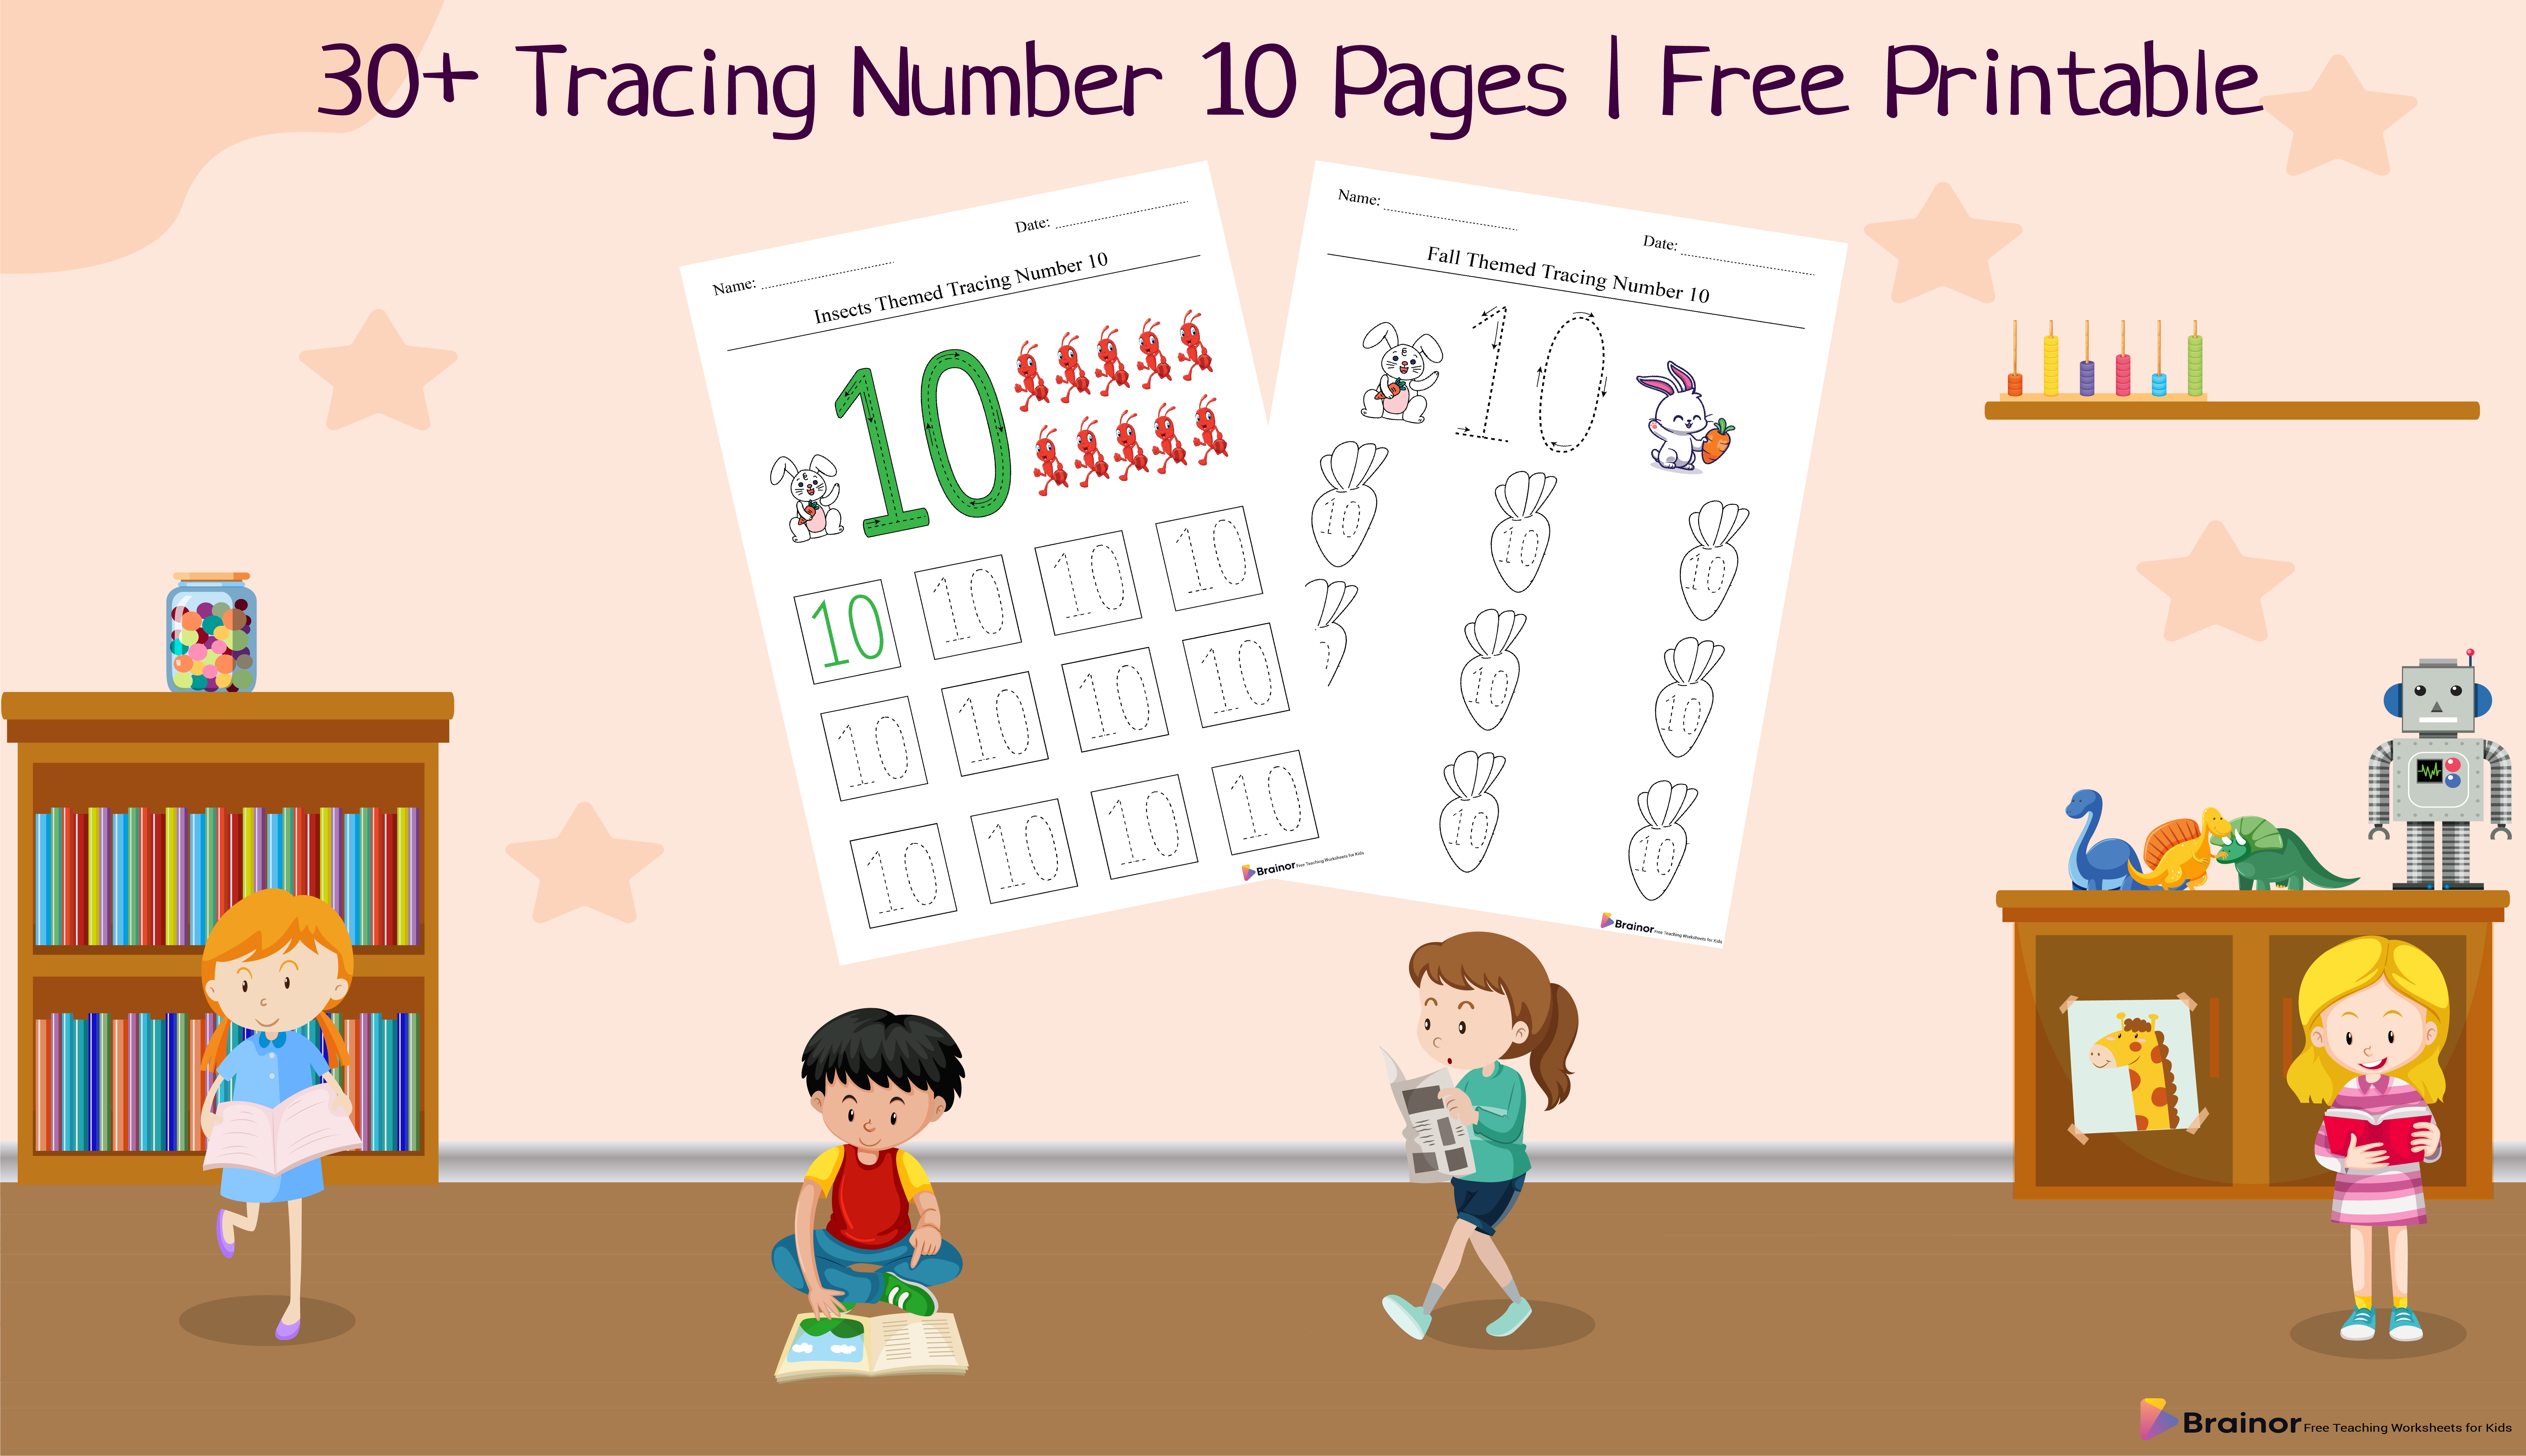 tracing number 10 - overview